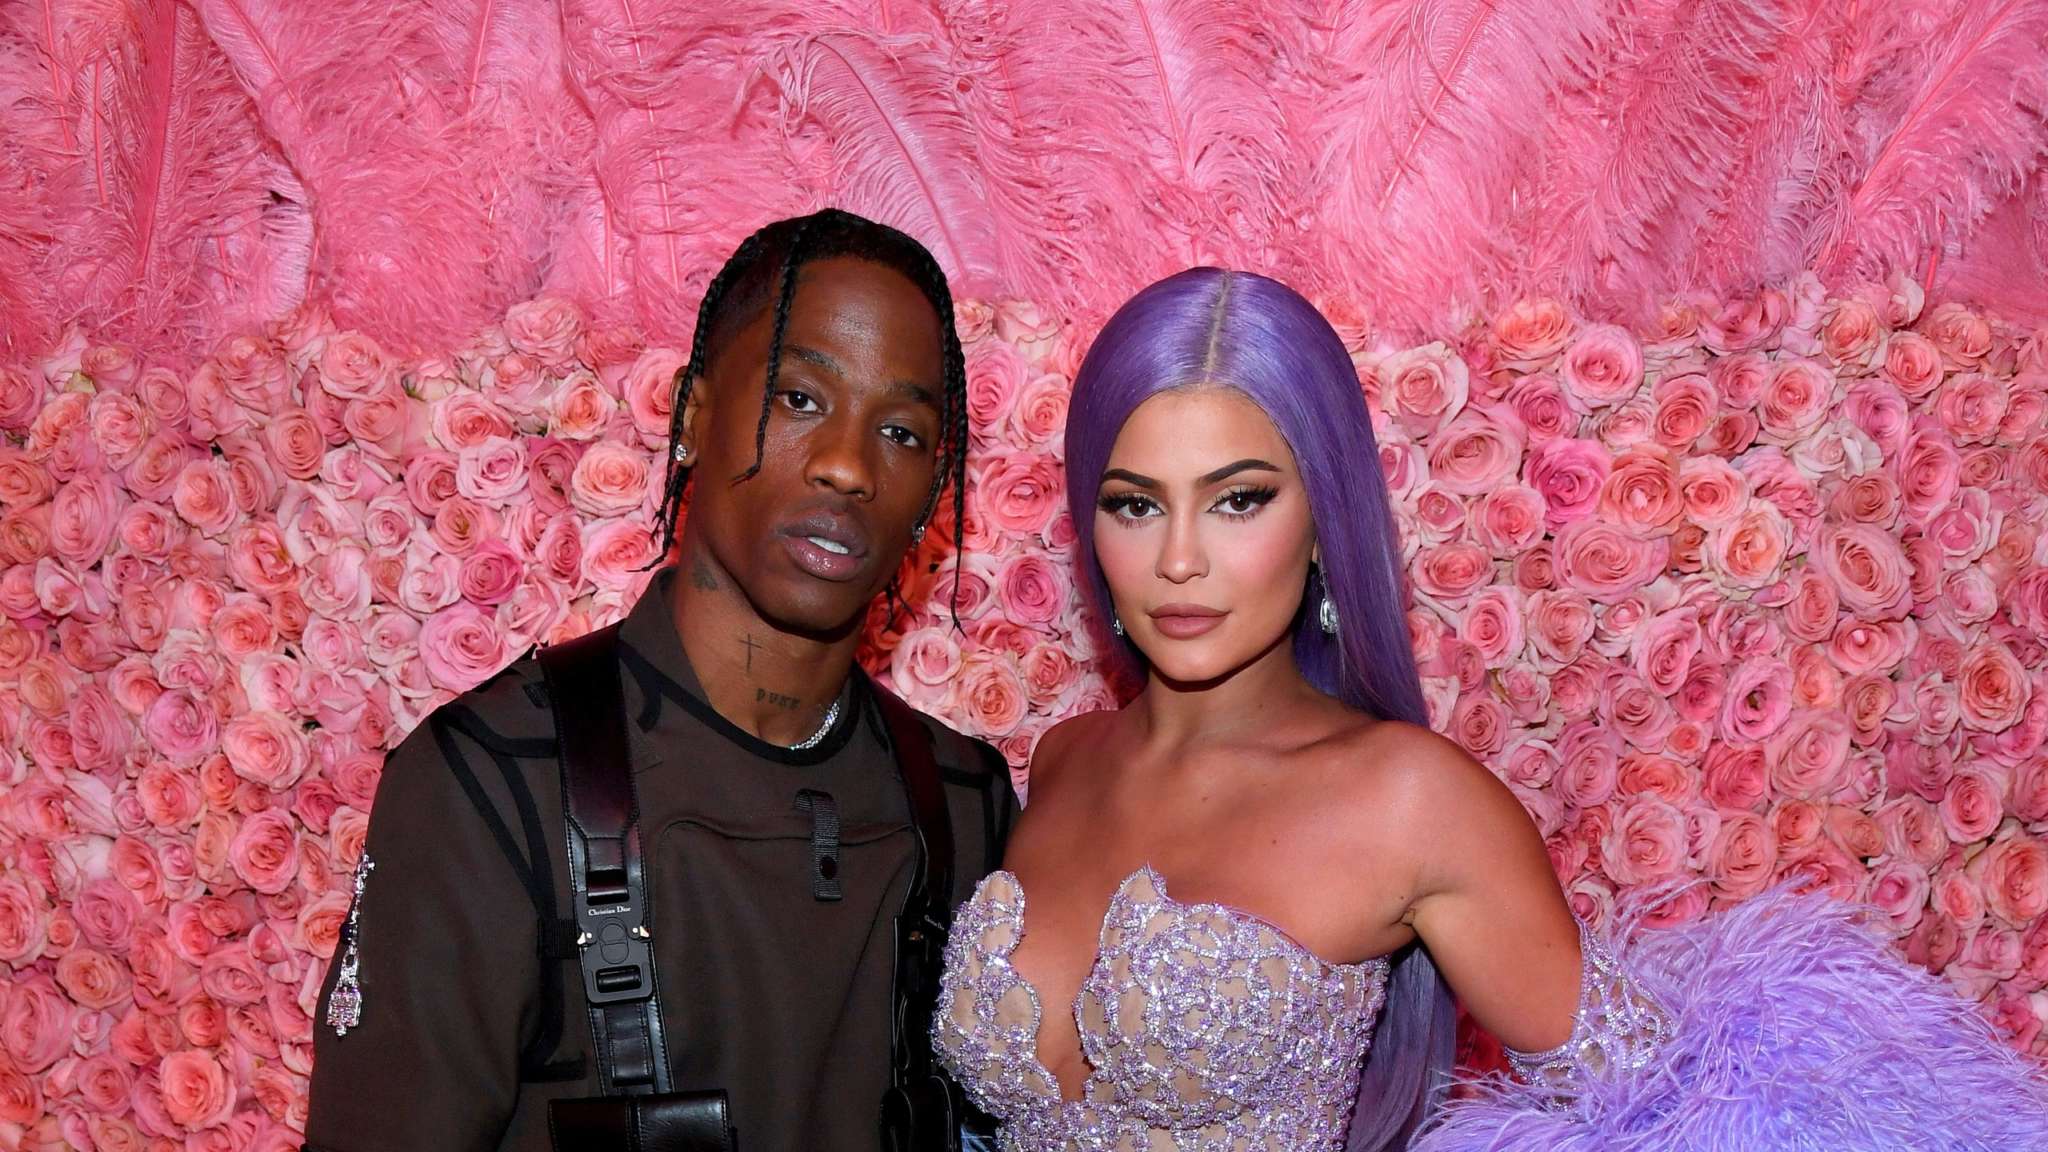 Kylie Jenner Reads Books About Soul Mates After Getting Back Together With Her Baby Daddy, Travis Scott